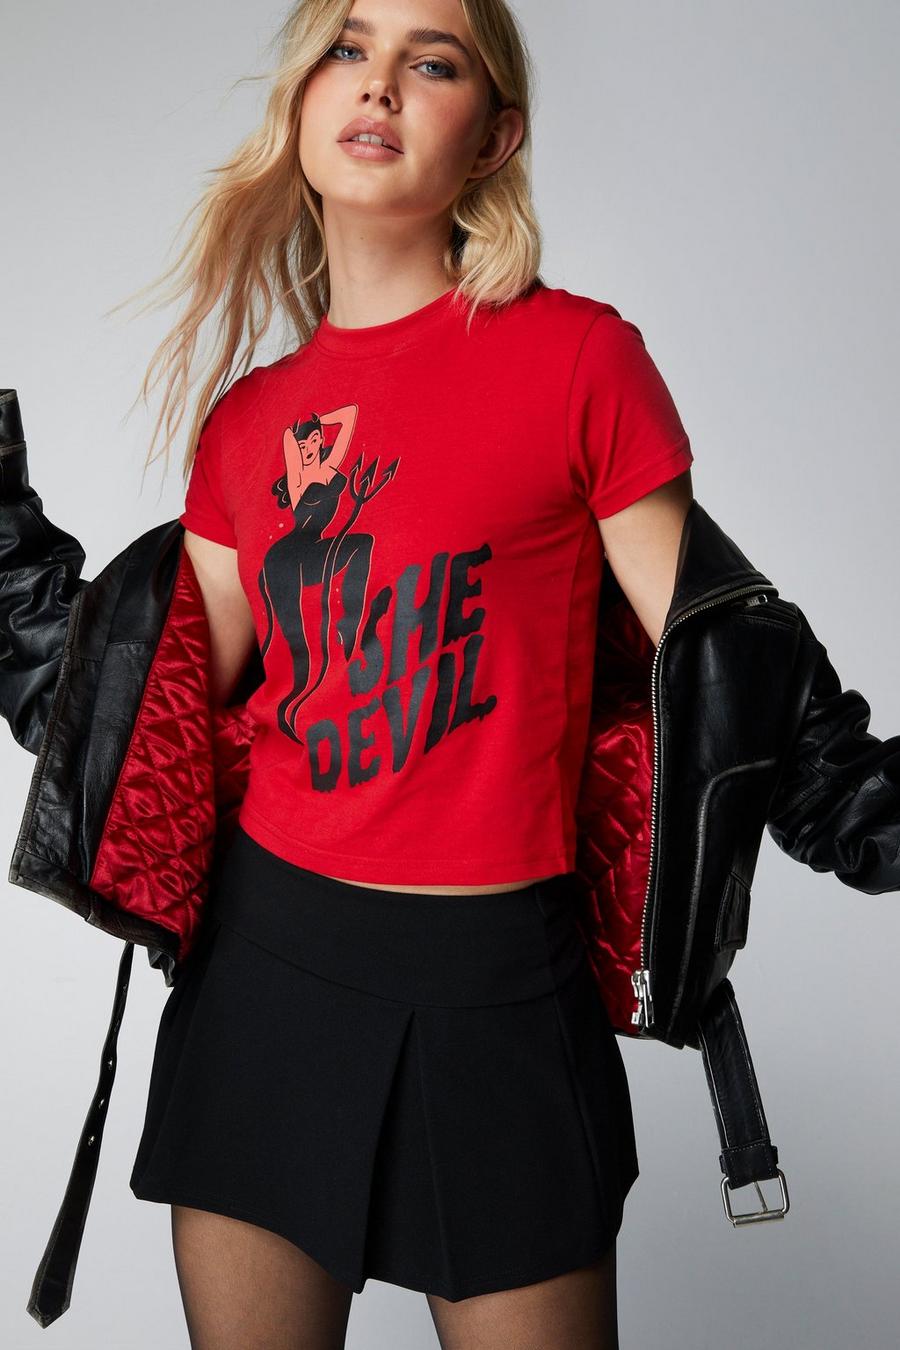 Red She Devil Baby Tee